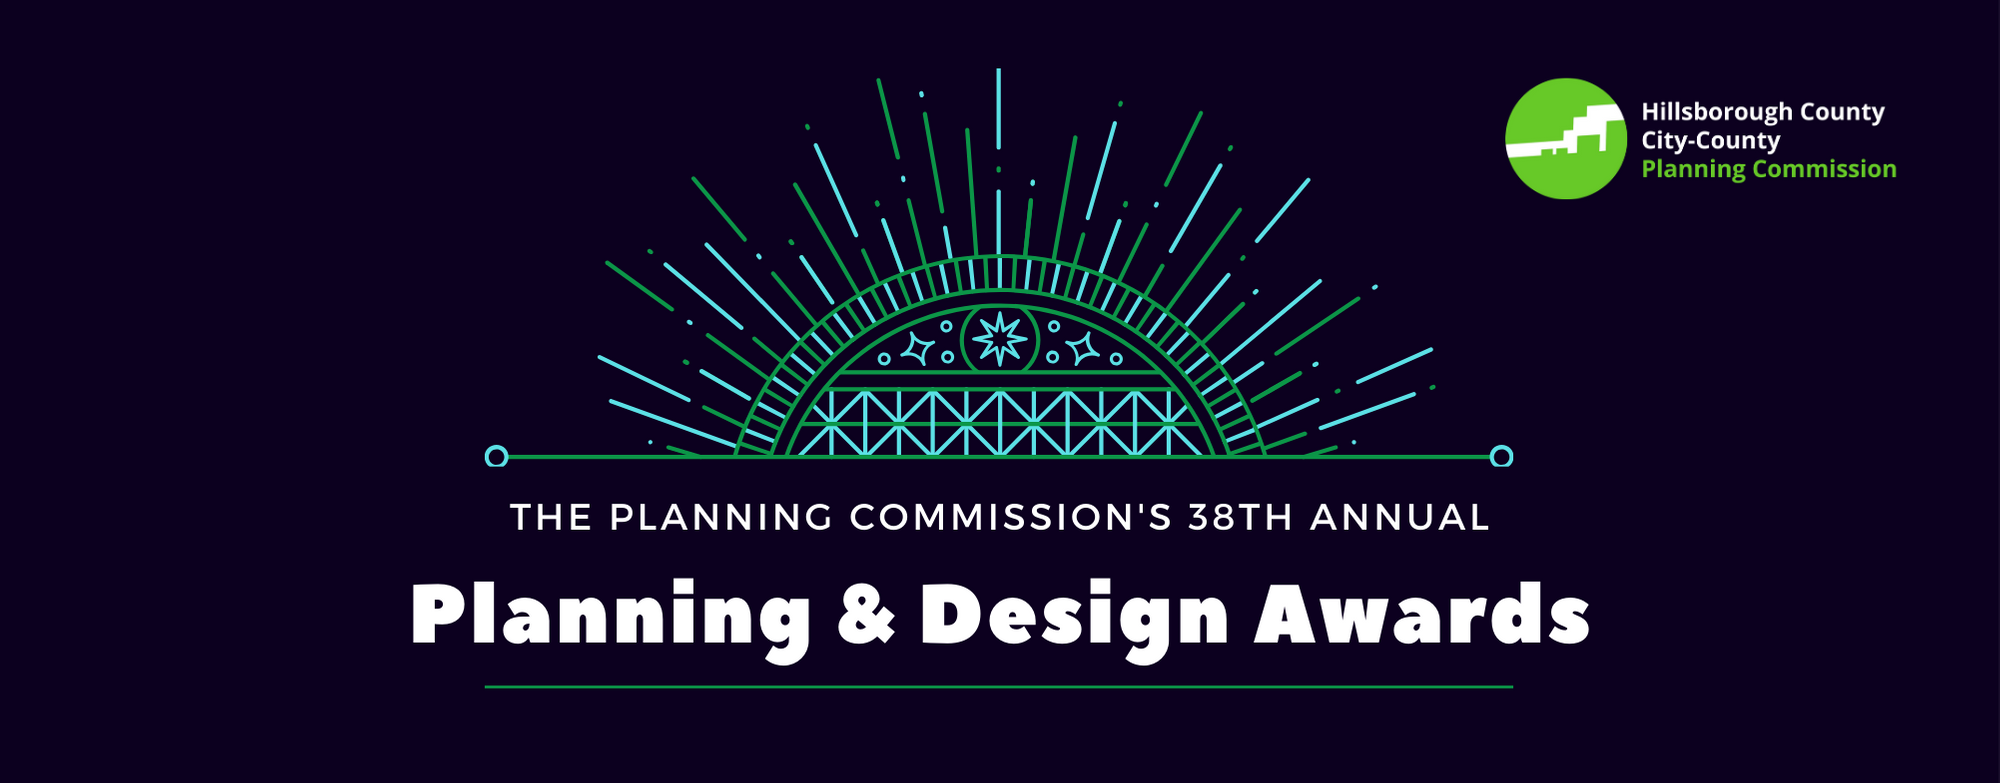 Call for entries for our 38th Annual Planning & Design Awards